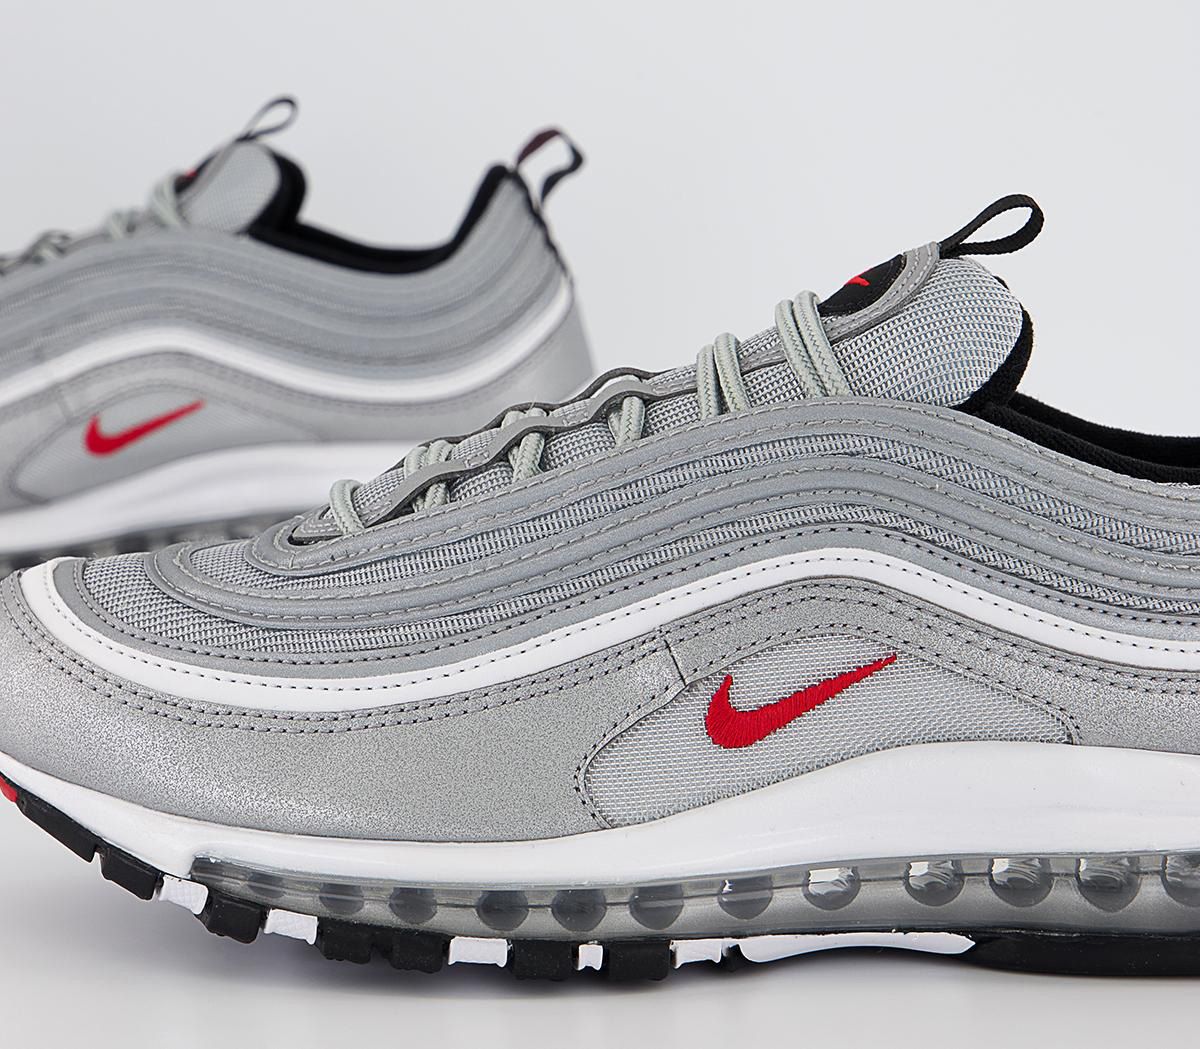 Where to Buy the Nike Air Max 97 